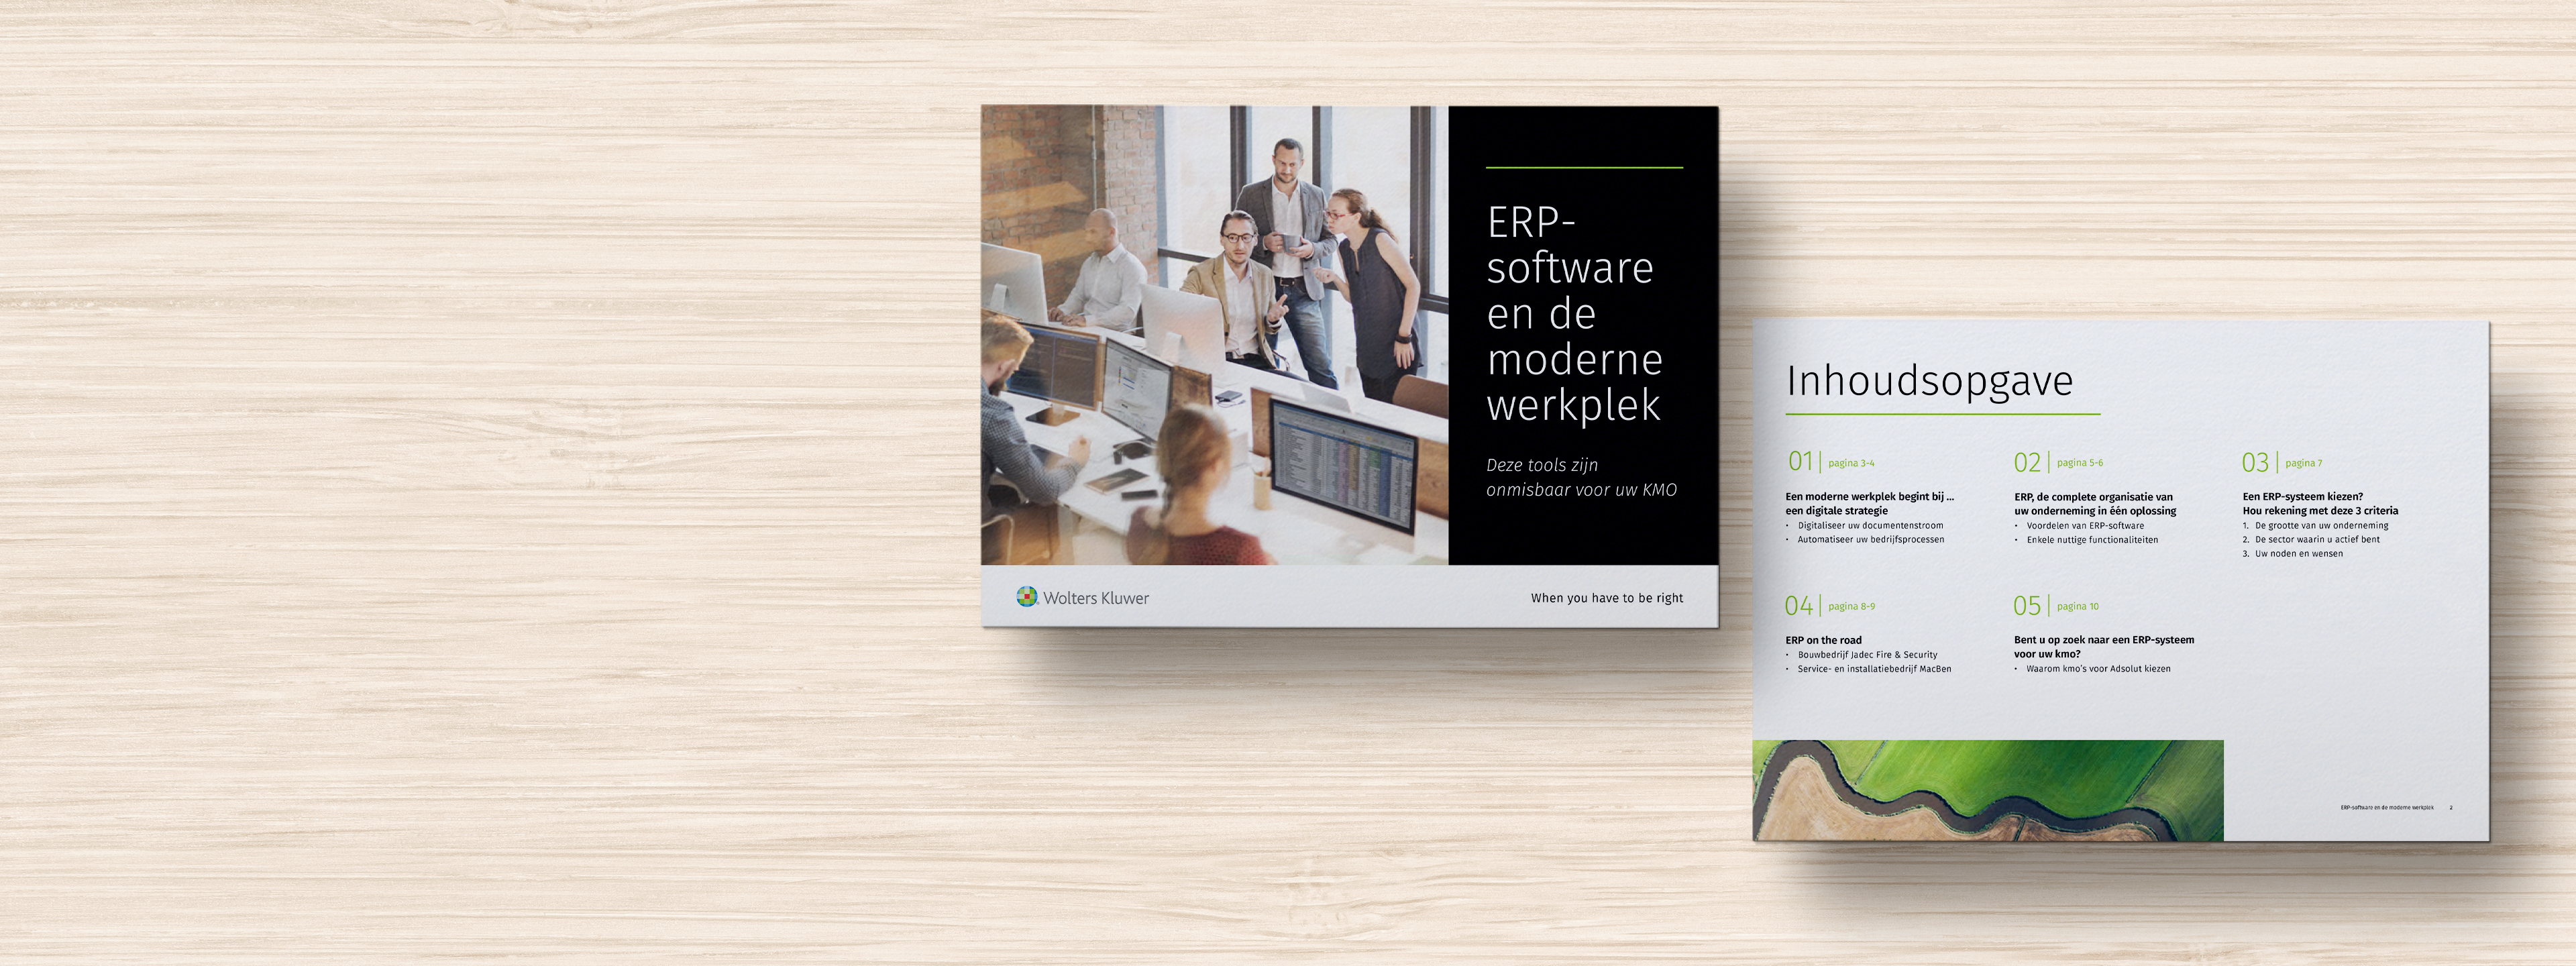 Wolters Kluwer E-book Mockup 3840x1440px ERP-software